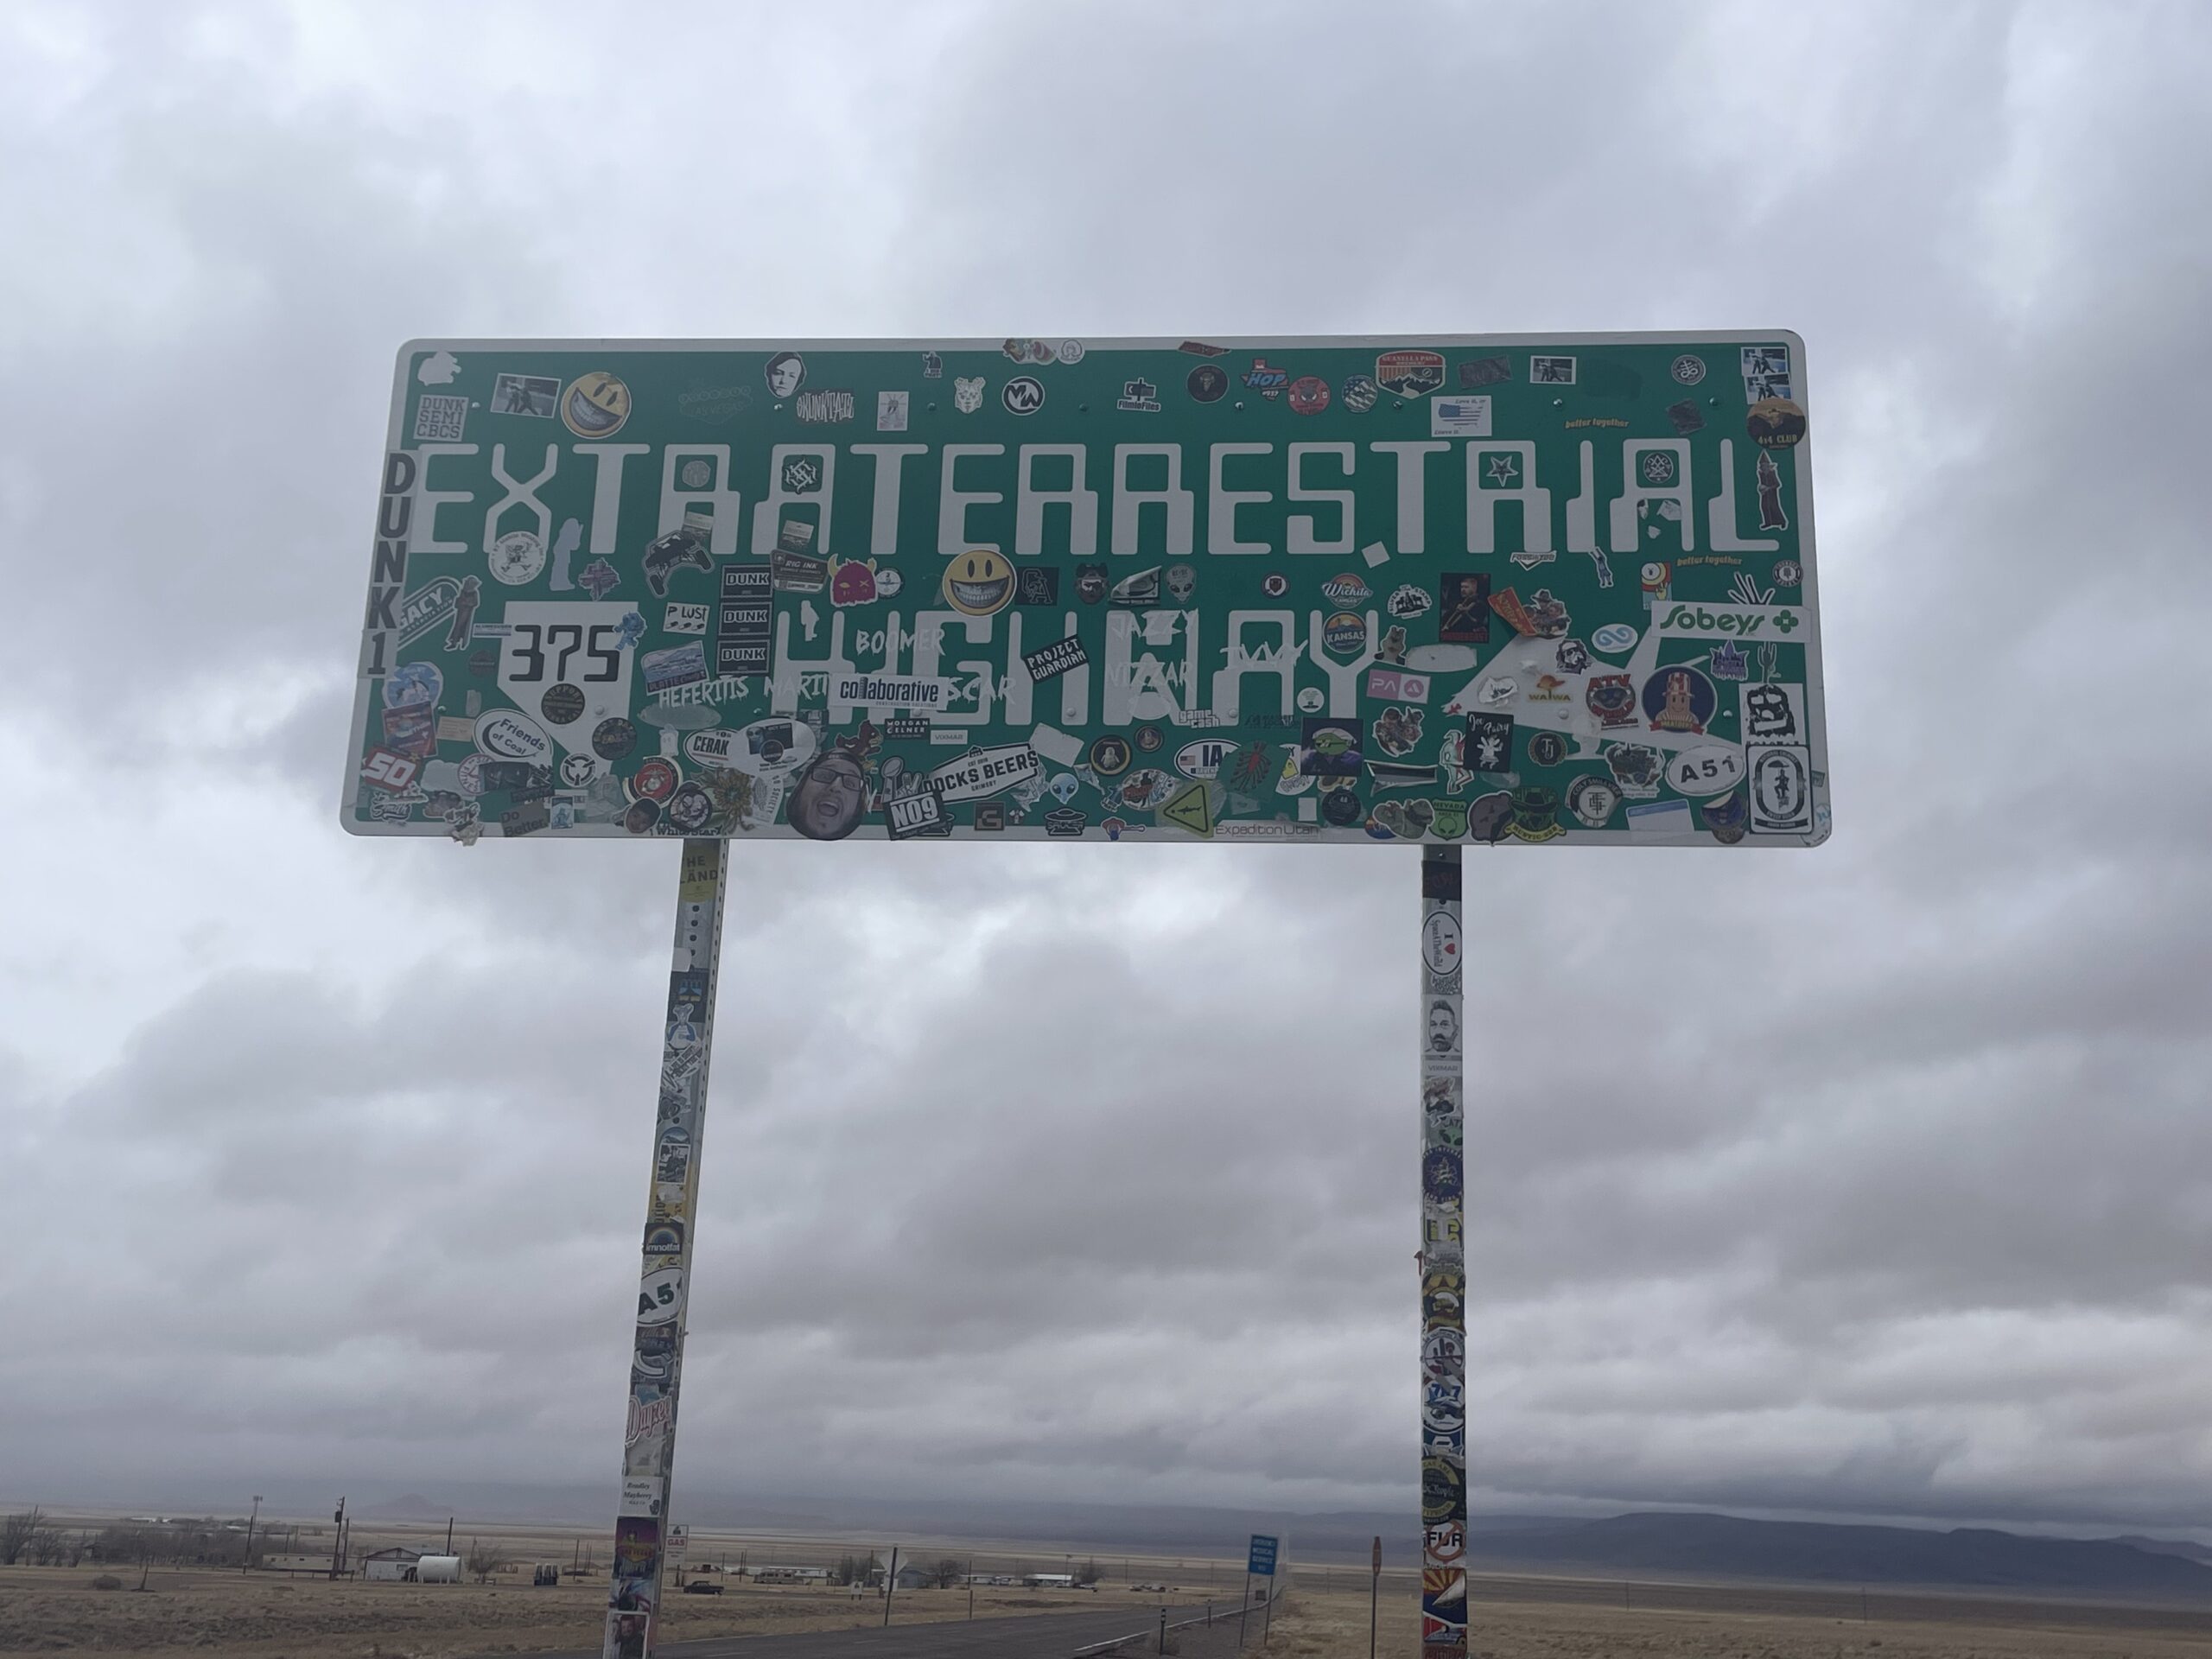 Green road sign covered in stickers. The words "Extraterrestrial Highway" are barely visible through the stickers. 